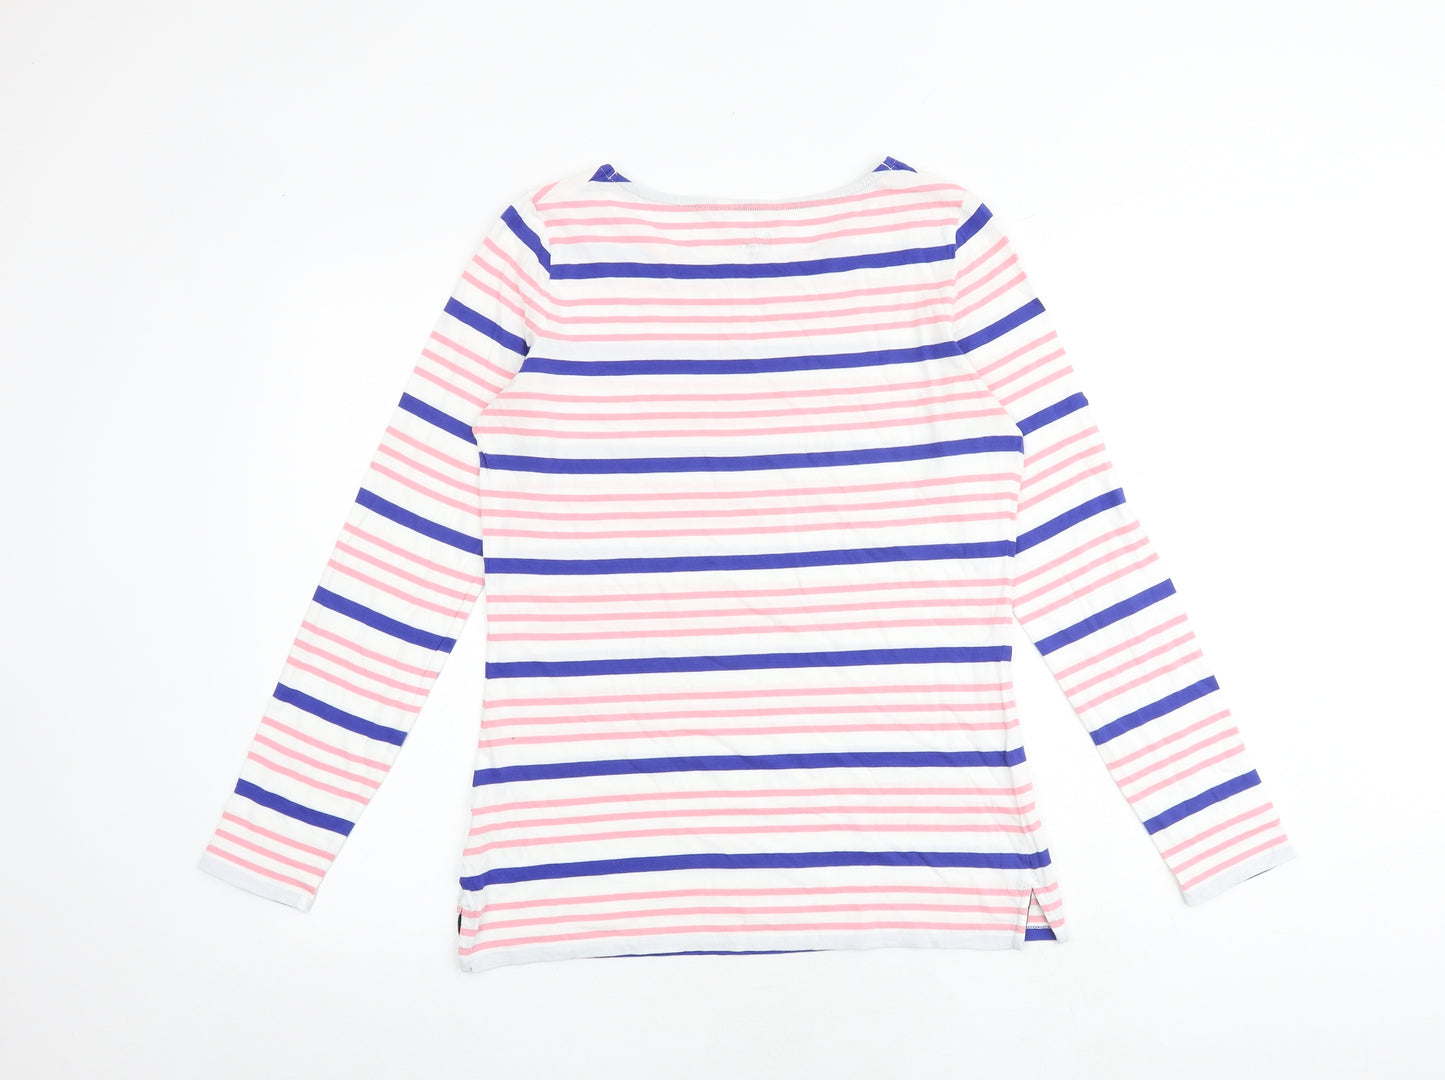 Boden Womens Multicoloured Striped 100% Cotton Basic T-Shirt Size 12 Boat Neck